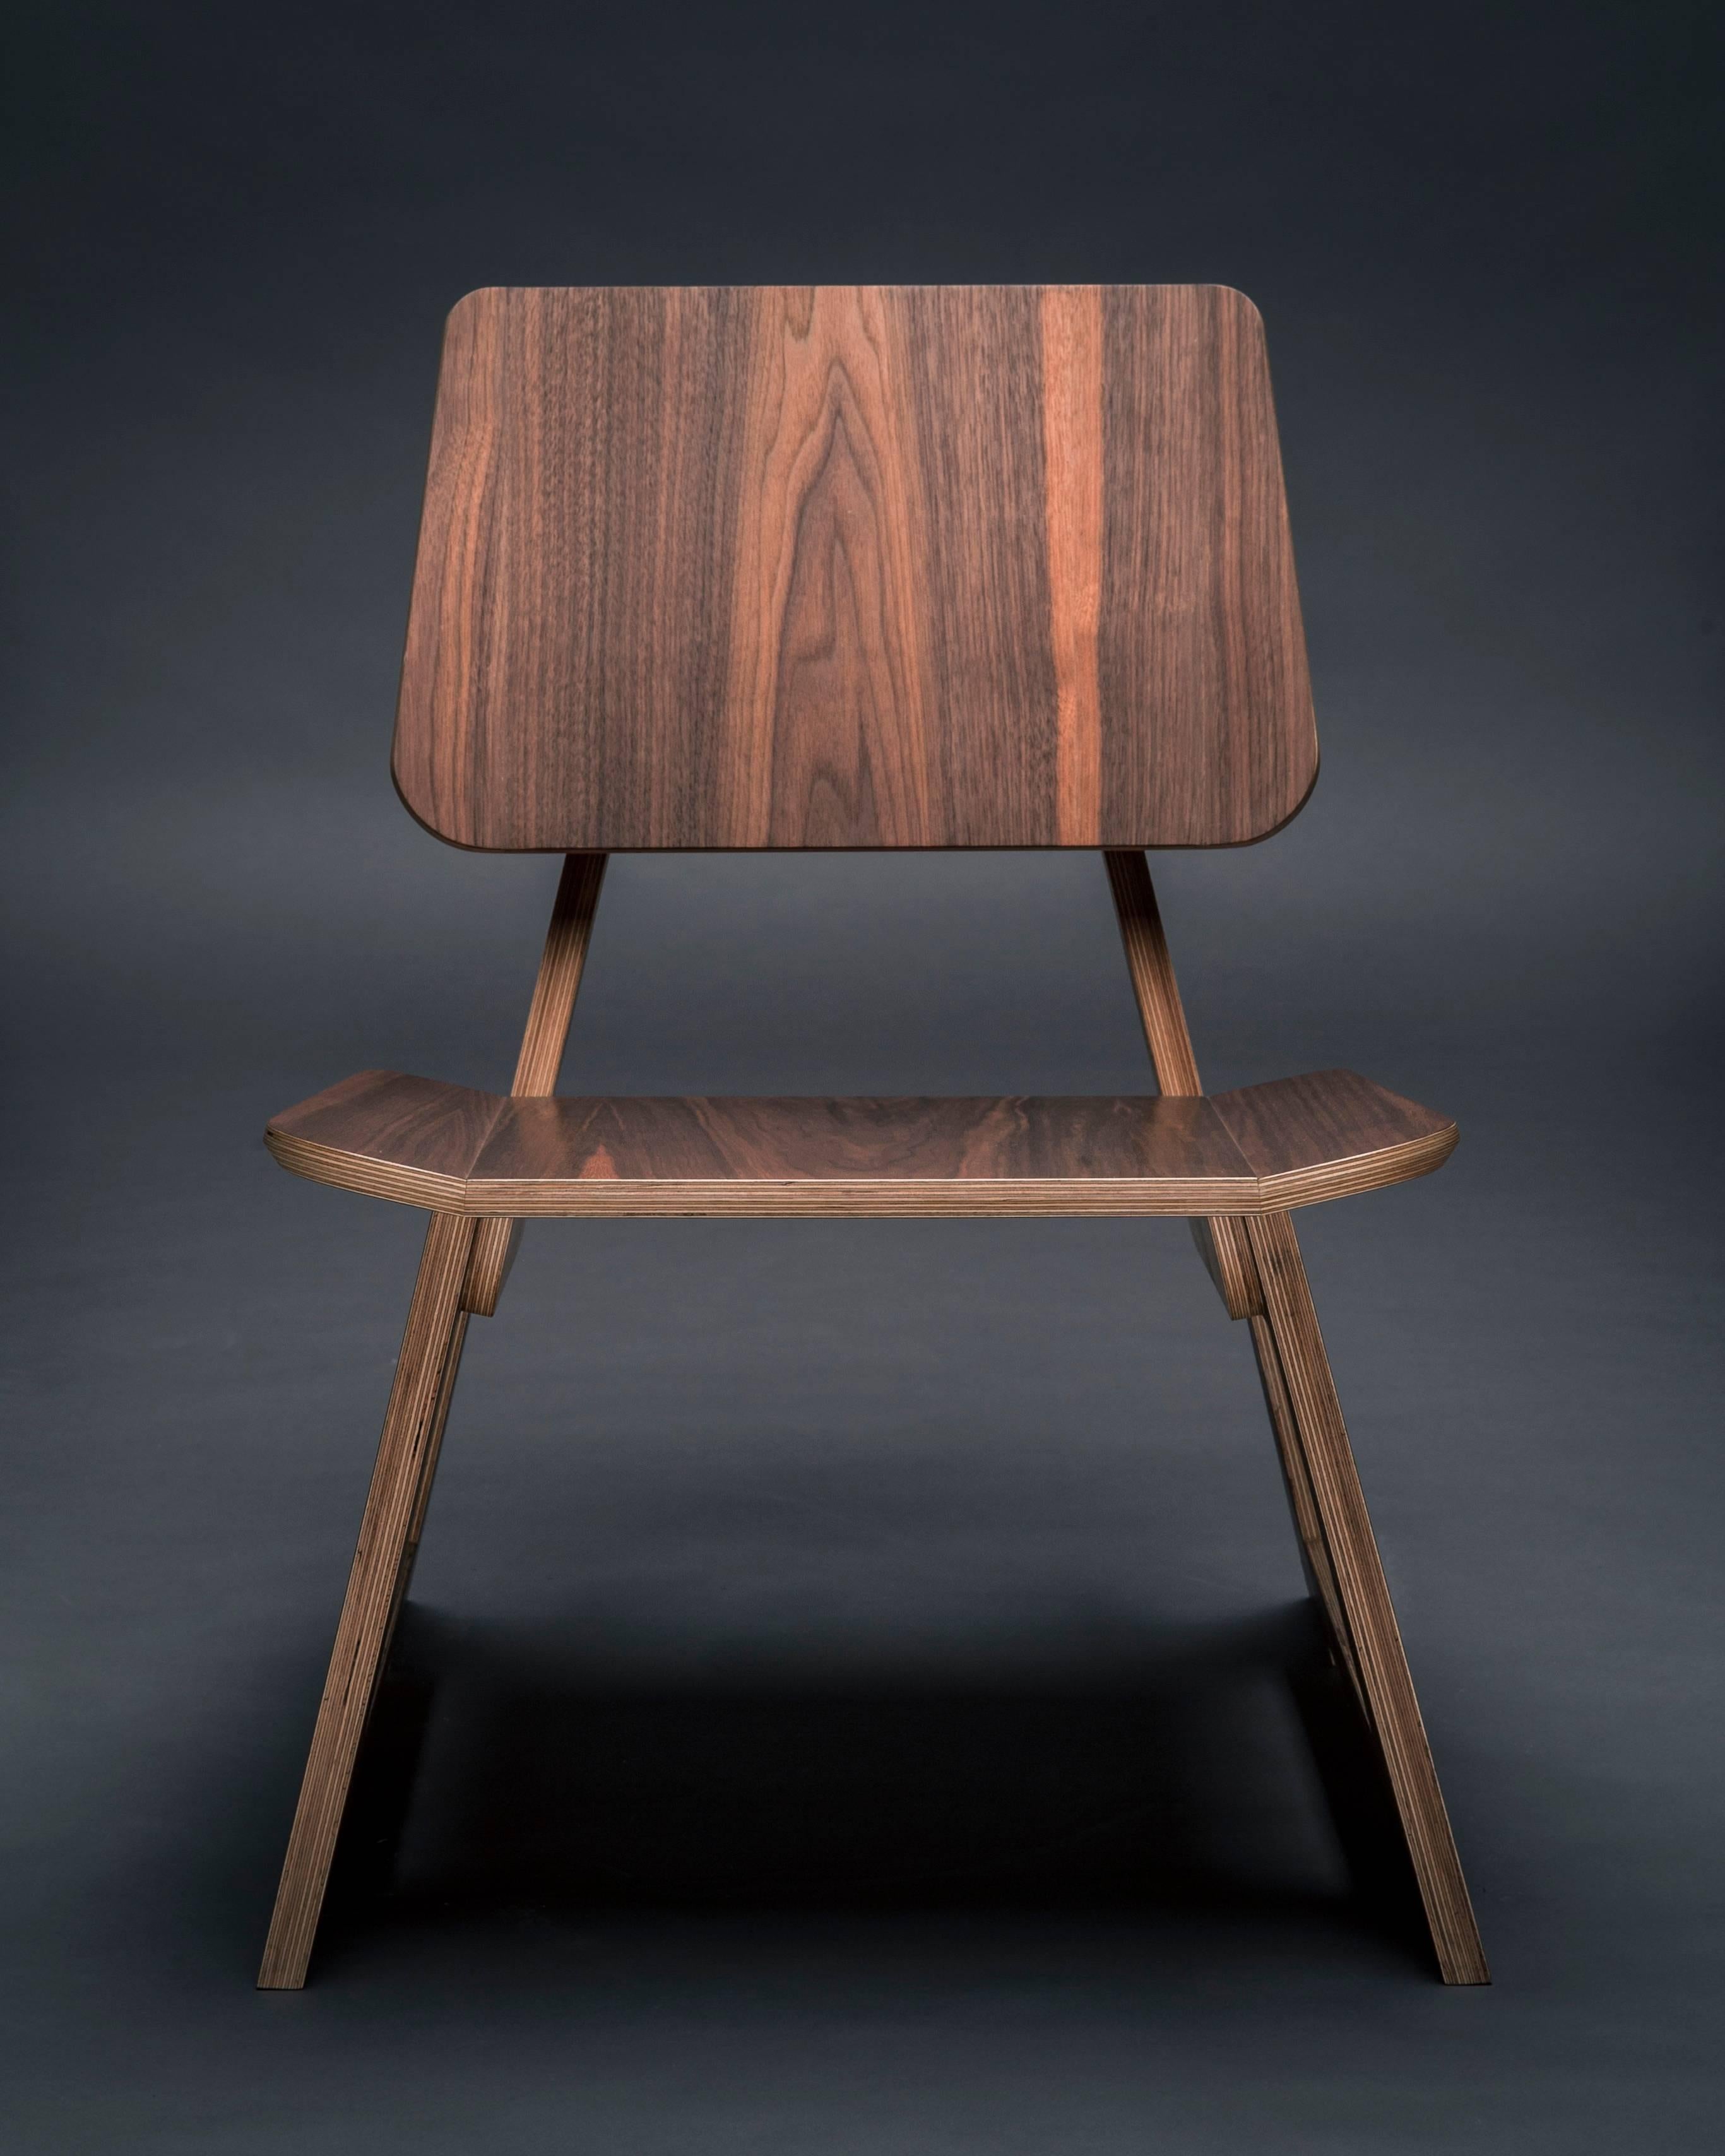 The Mafoo lounge chair is hand made to order and can be made in a variety of veneers and fabrics.